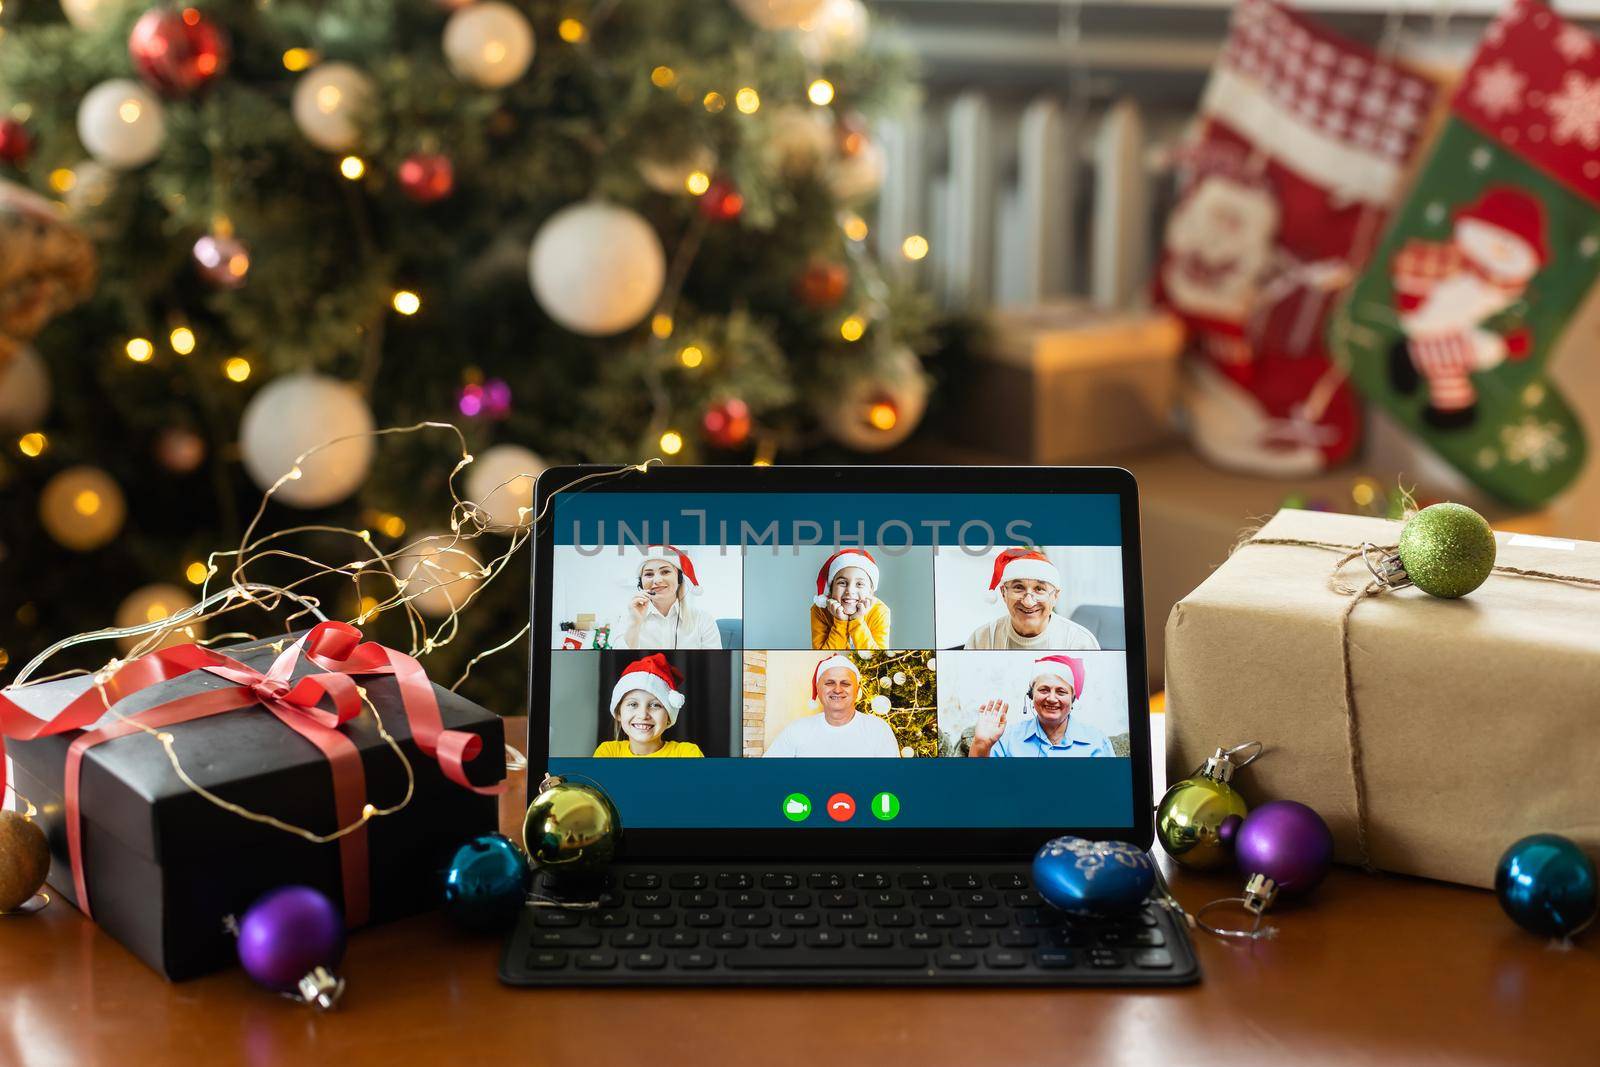 Big family singing christmas song at tablet camera during online video call. Smiling parents and children. Joyful family congratulating relatives with happy new year online.